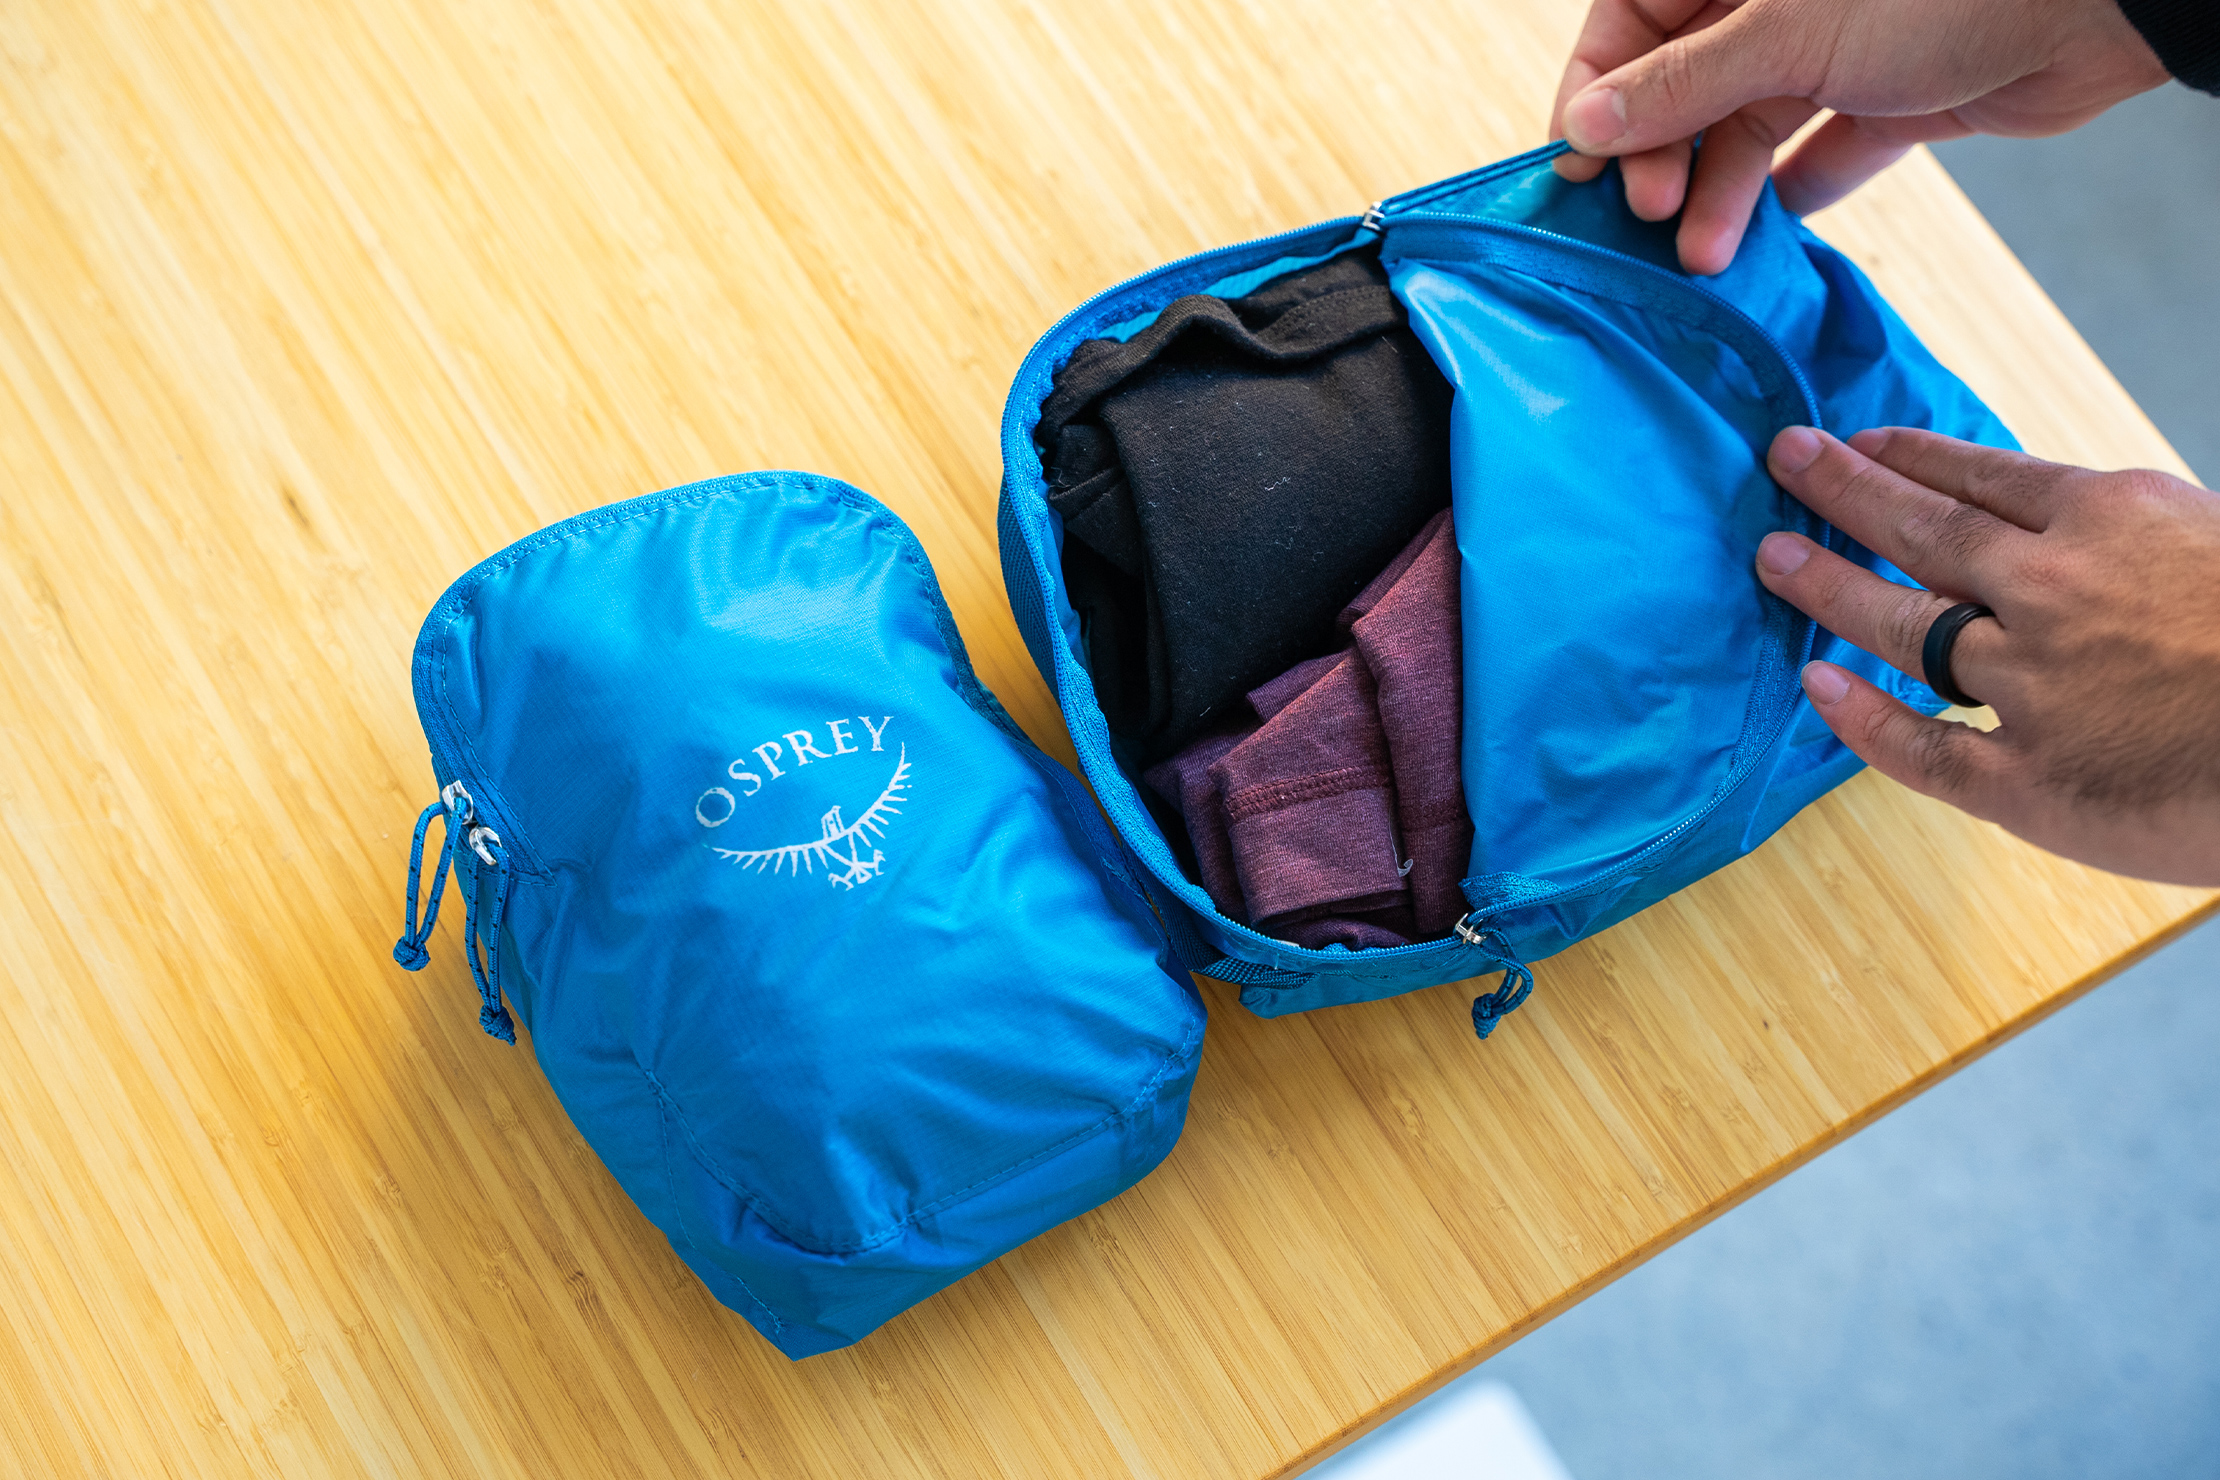 Osprey Ultralight Packing Cube Set in Use